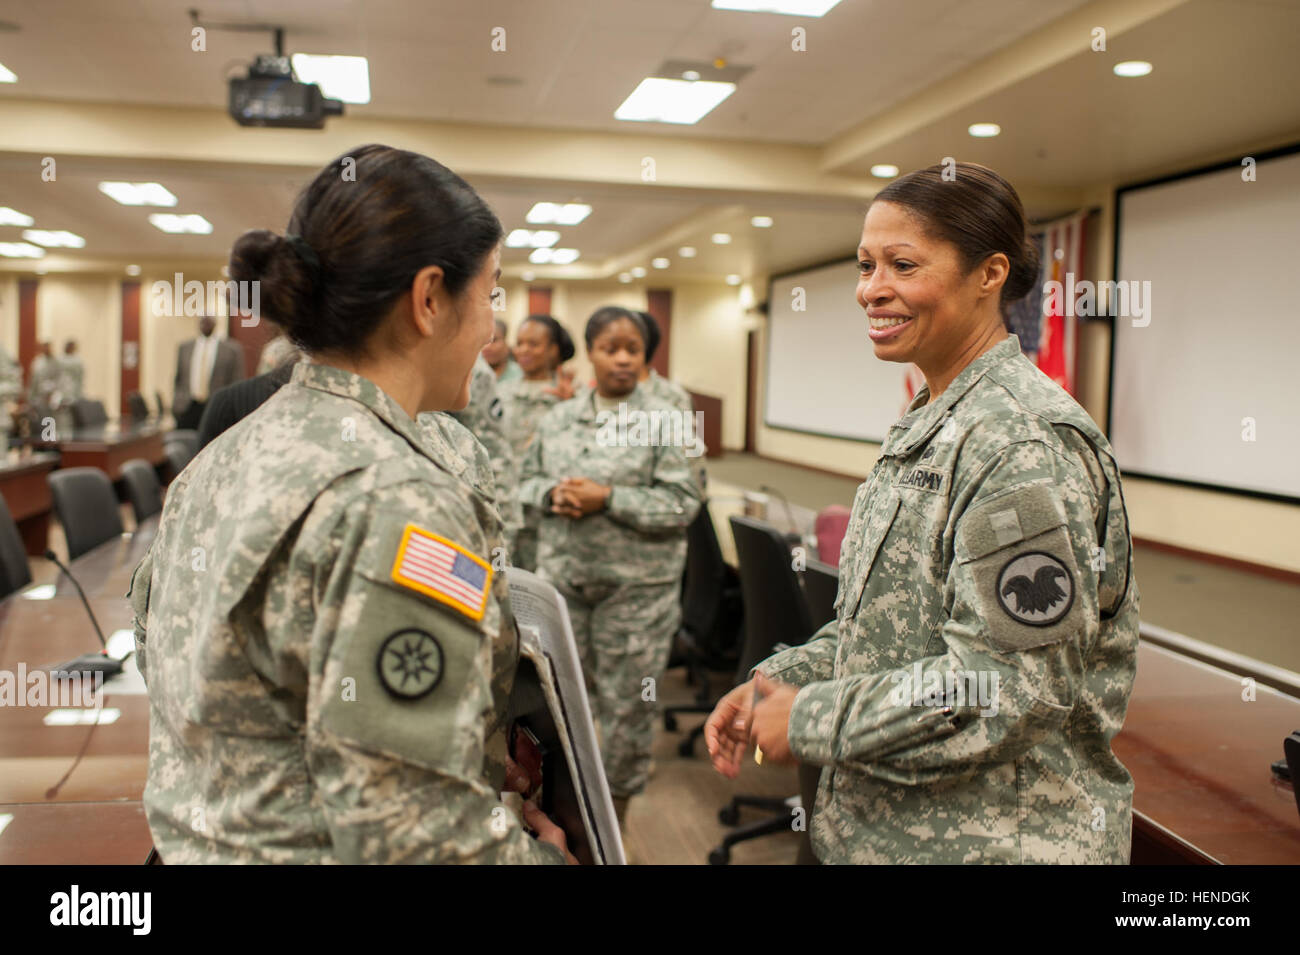 Maj. Gen. Marcia M. Anderson, the Deputy Chief, U.S. Army Reserve, was the guest speaker at a Women's History month observance at the U.S. Army Reserve Command headquarters at Fort Bragg, N.C., March 25, 2014. Anderson, the Army's first African American female major general highlighted the accomplishments of women dating back to the Revolutionary War and the current evaluation process of opening previously closed military occupations to women. (U.S. Army photo by Timothy L. Hale/Released) Women continue to prove themselves in uniform 140325-A-XN107-919 Stock Photo